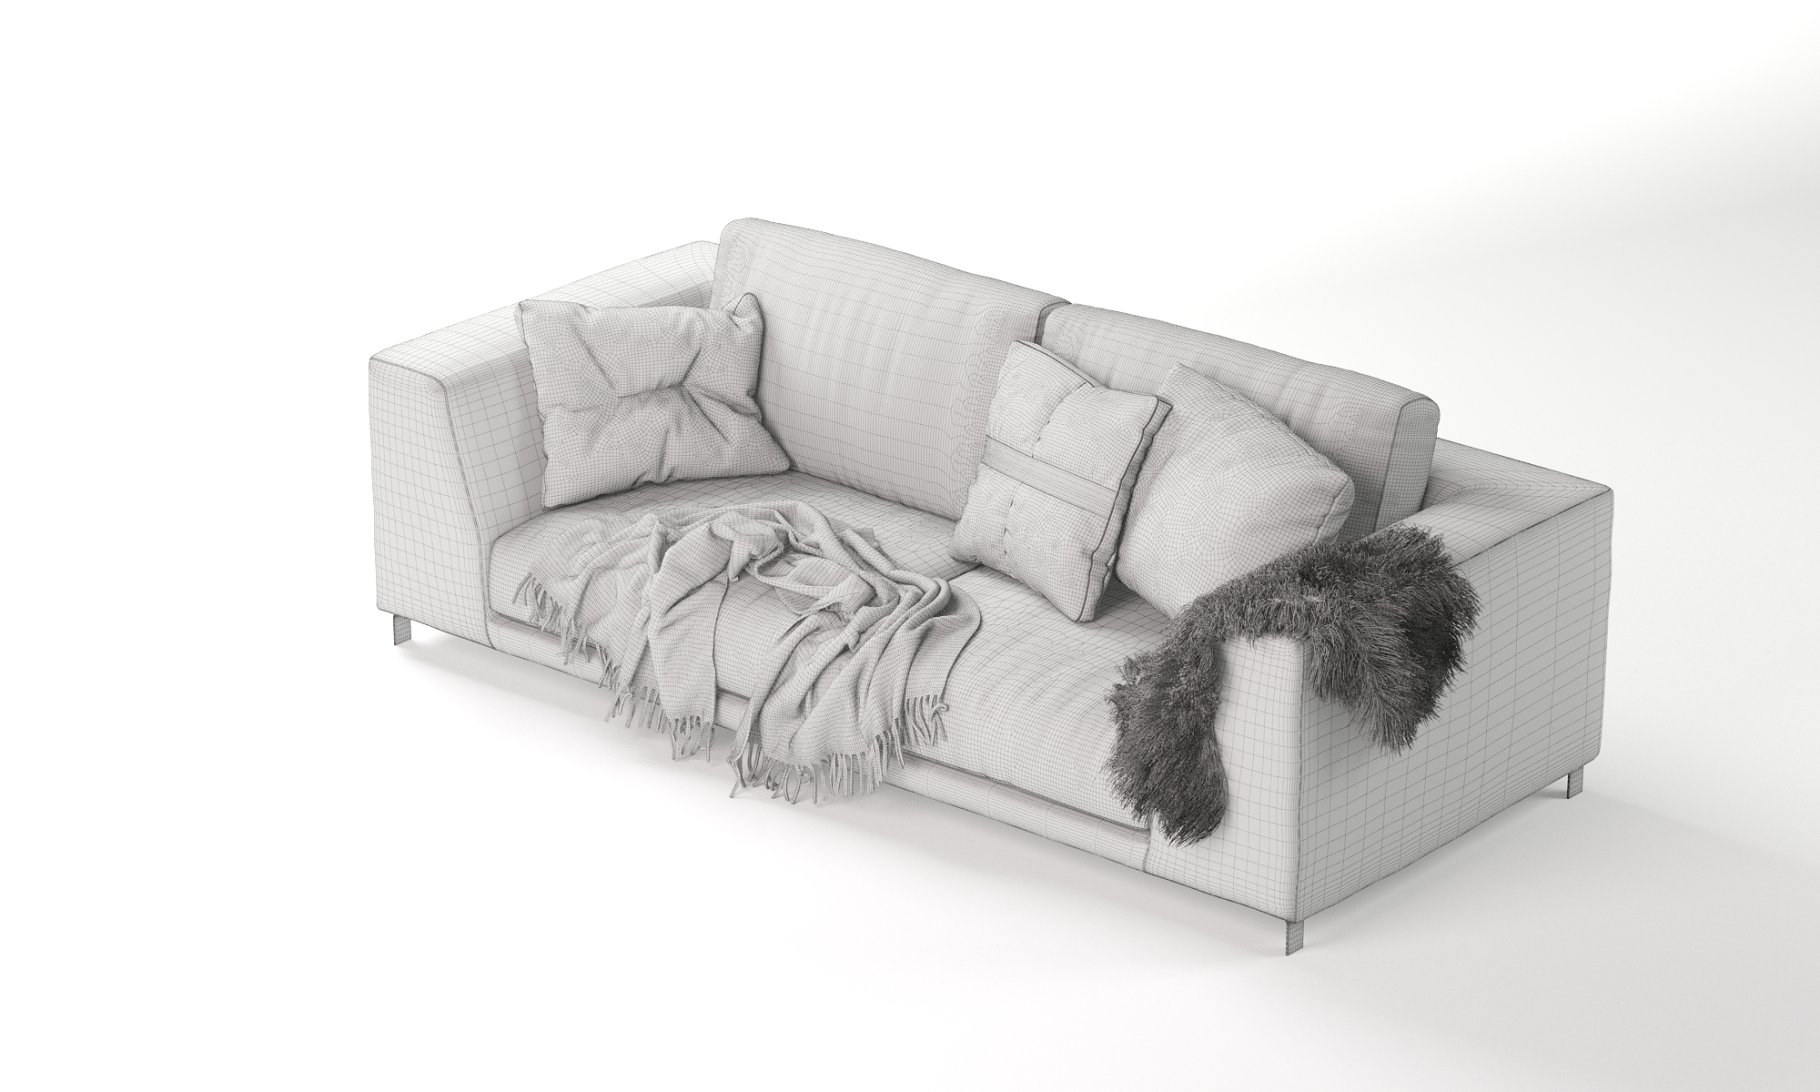 Rendering of an exquisite 3d model of a sofa without textures